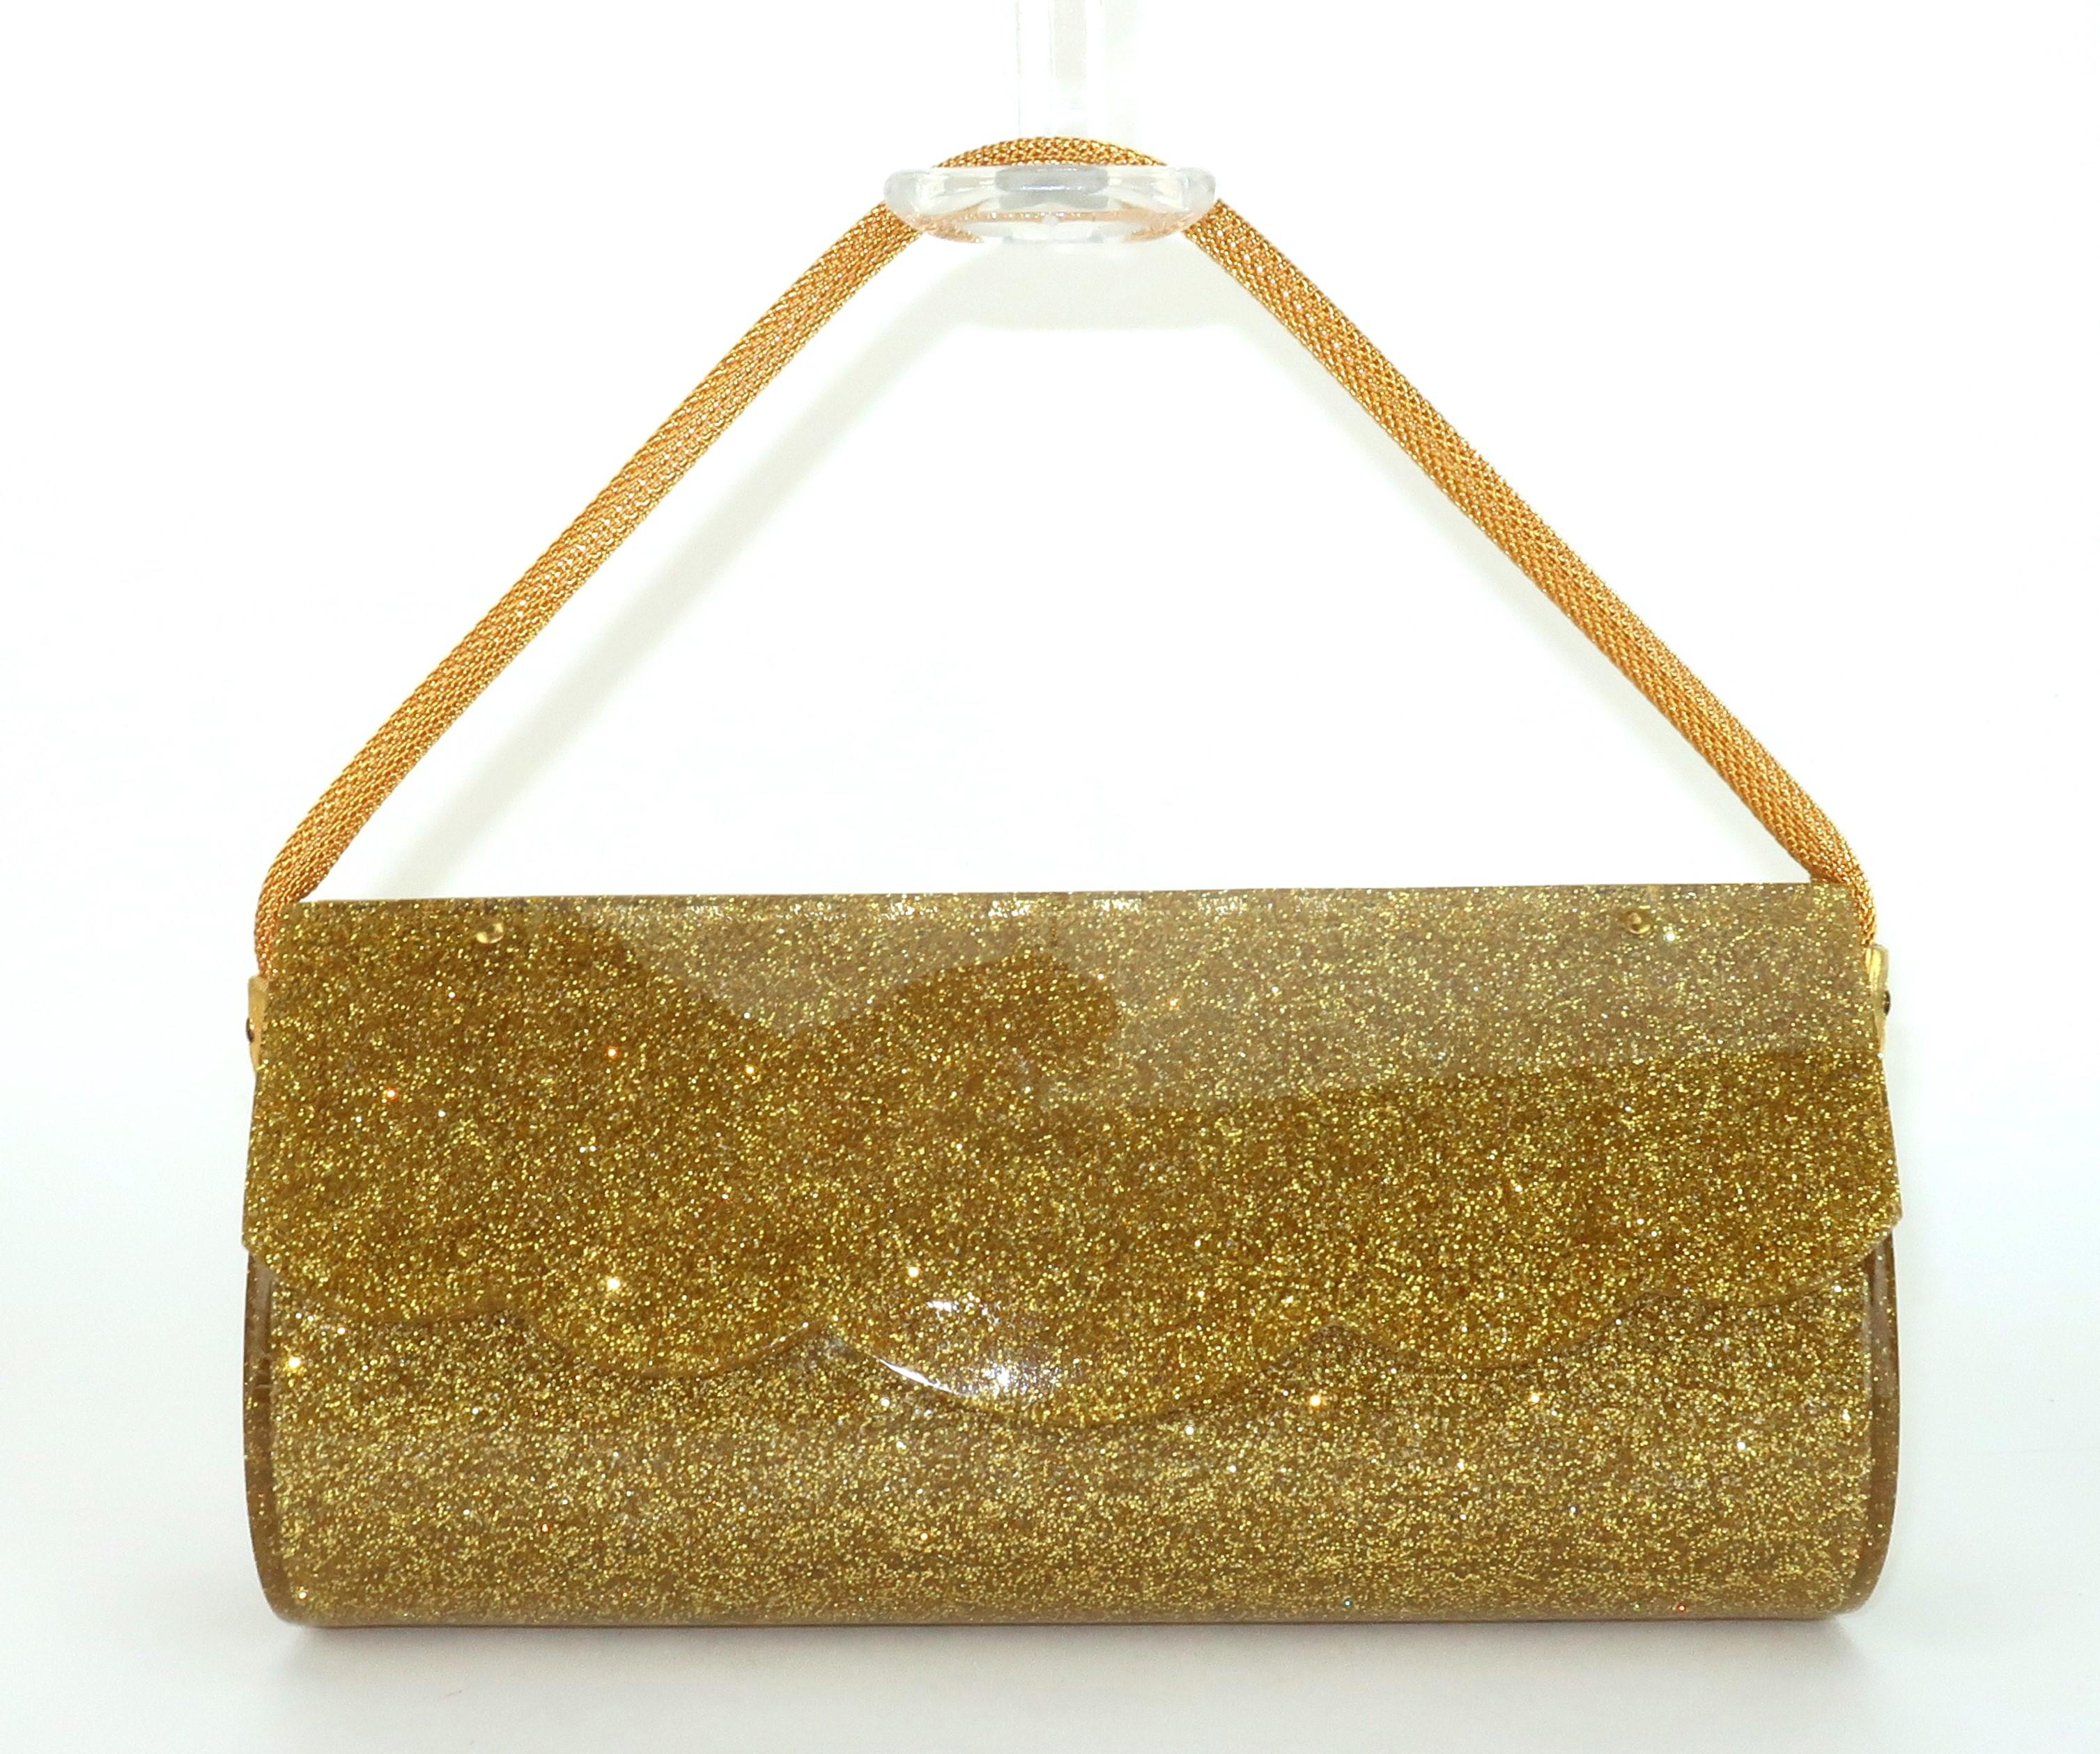 Get the Midas touch with this 1950’s gold glitter lucite evening handbag with metal rope handle and a springloaded closure decorated by a scalloped detail.  The teardrop shaped profile provides a surprisingly roomy interior with enough space for